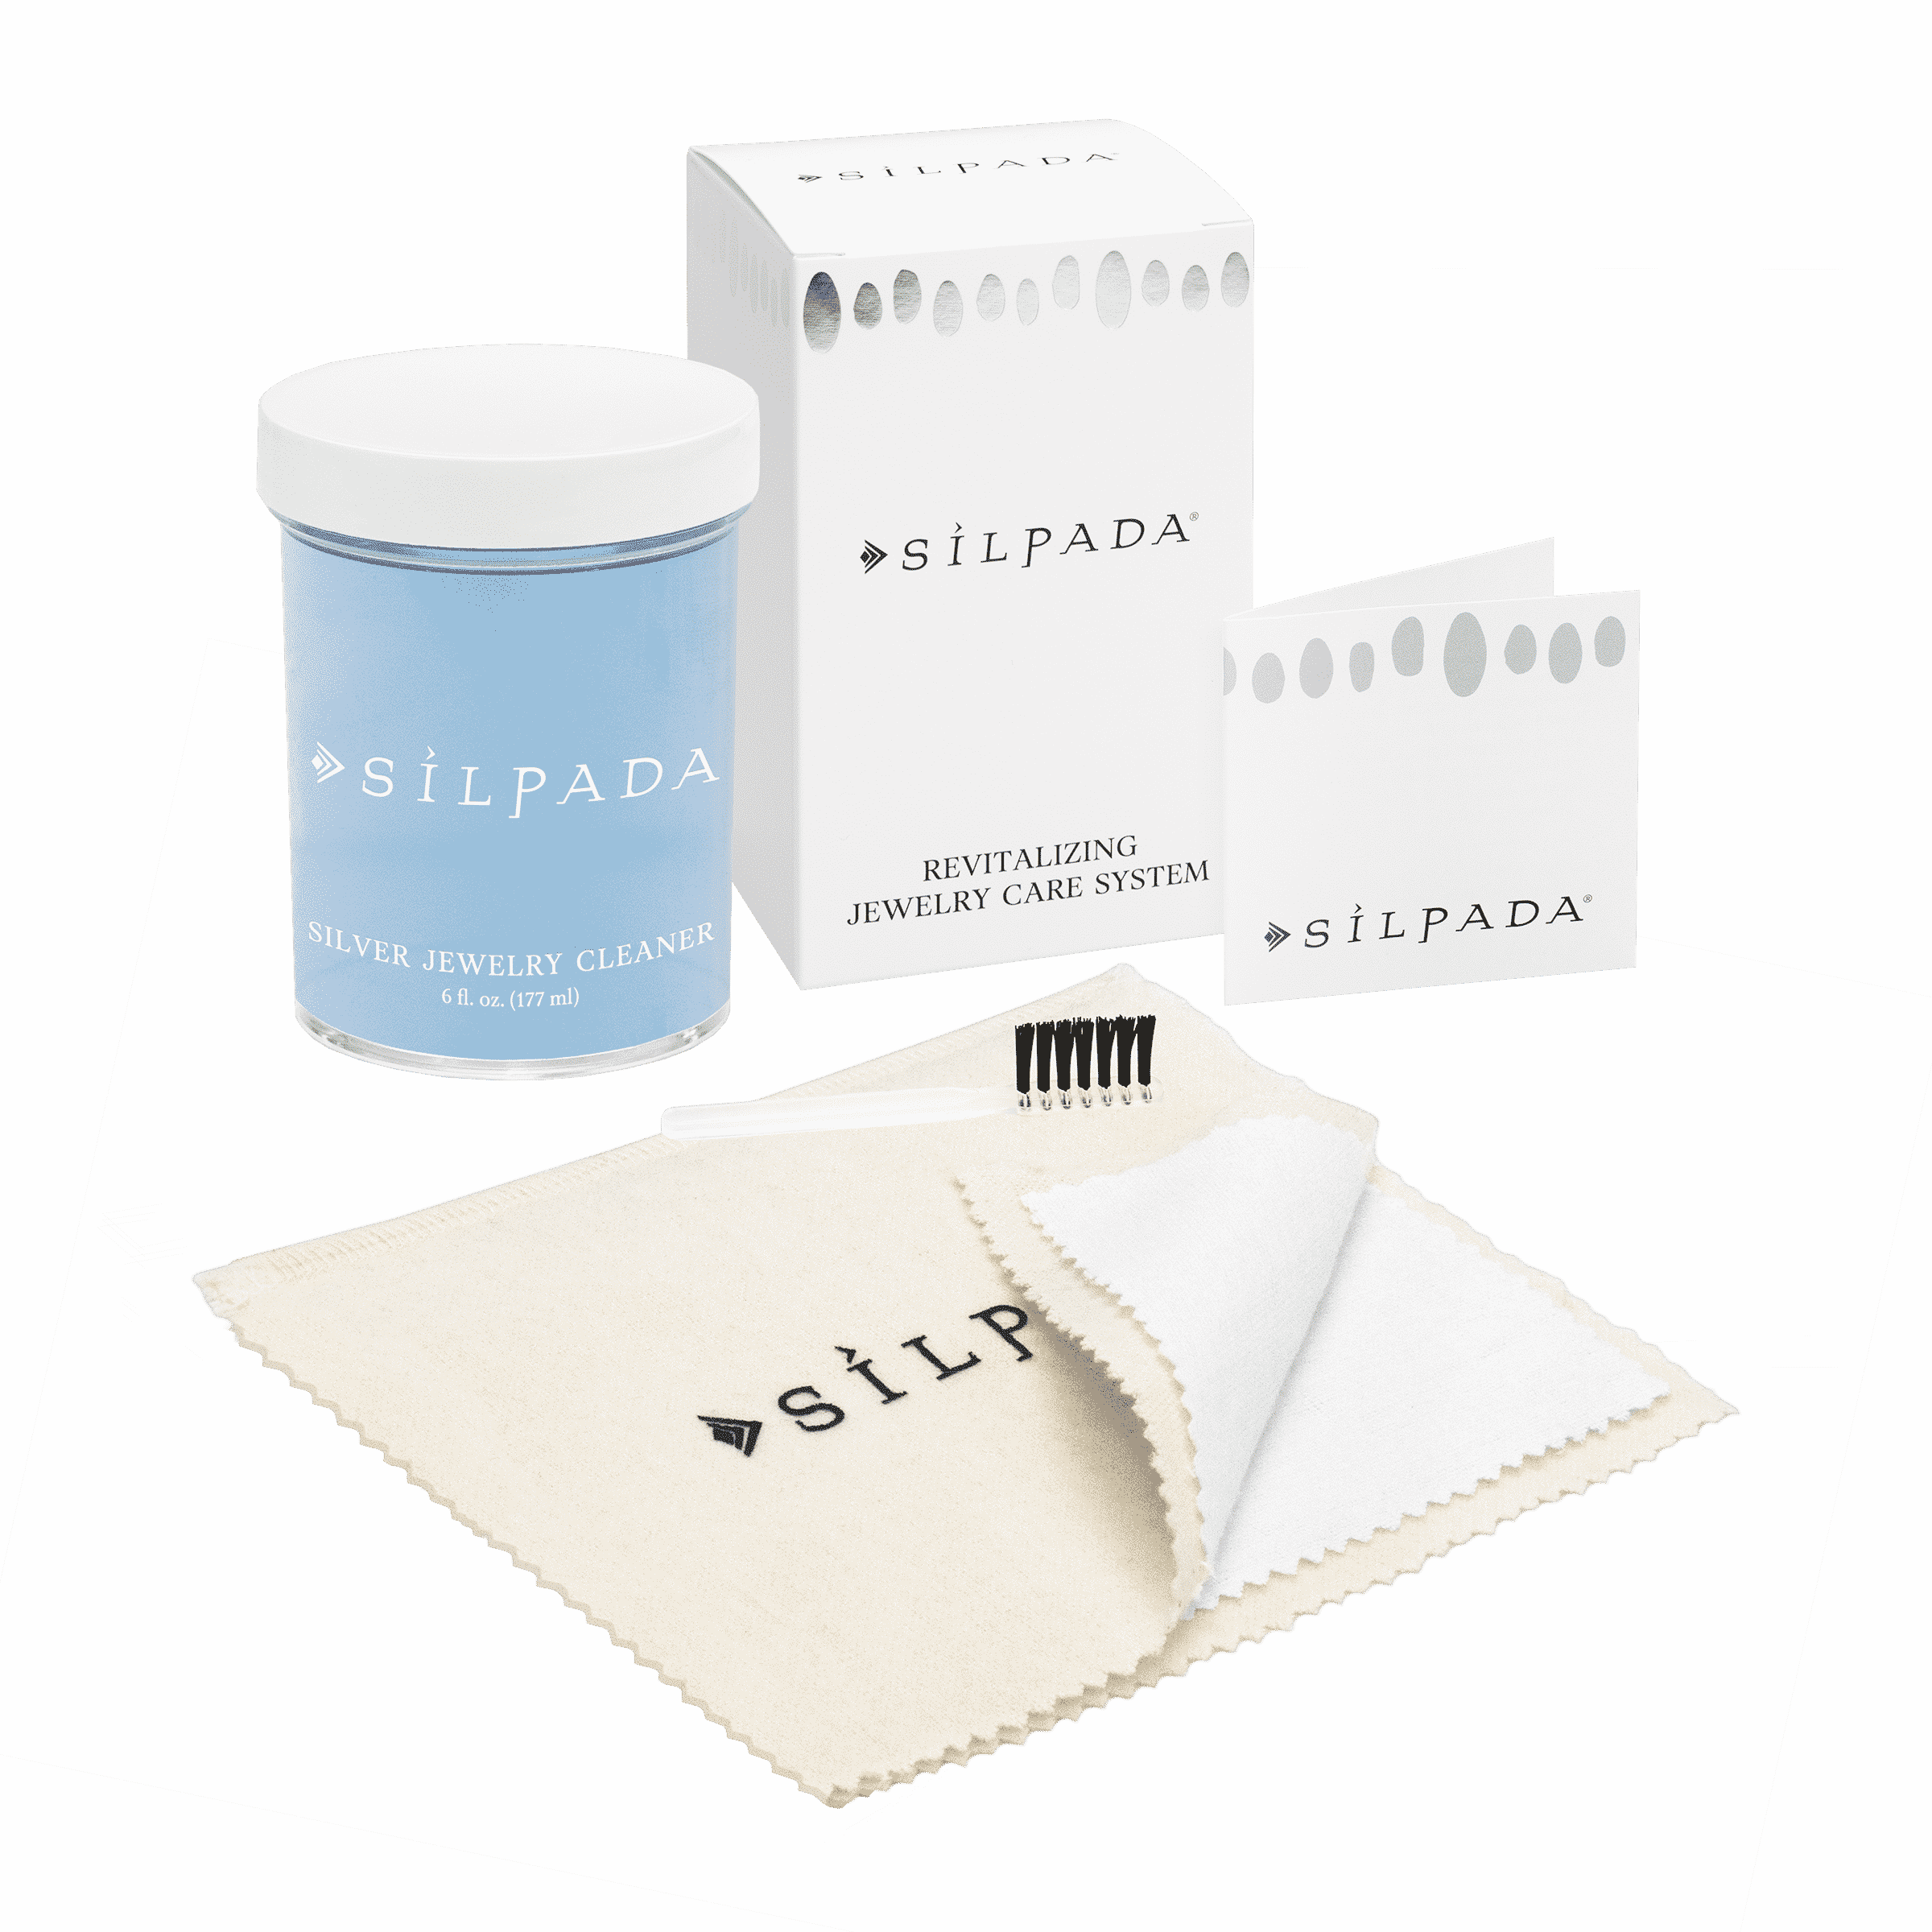 HEDA Jewelry Cleaning Kit